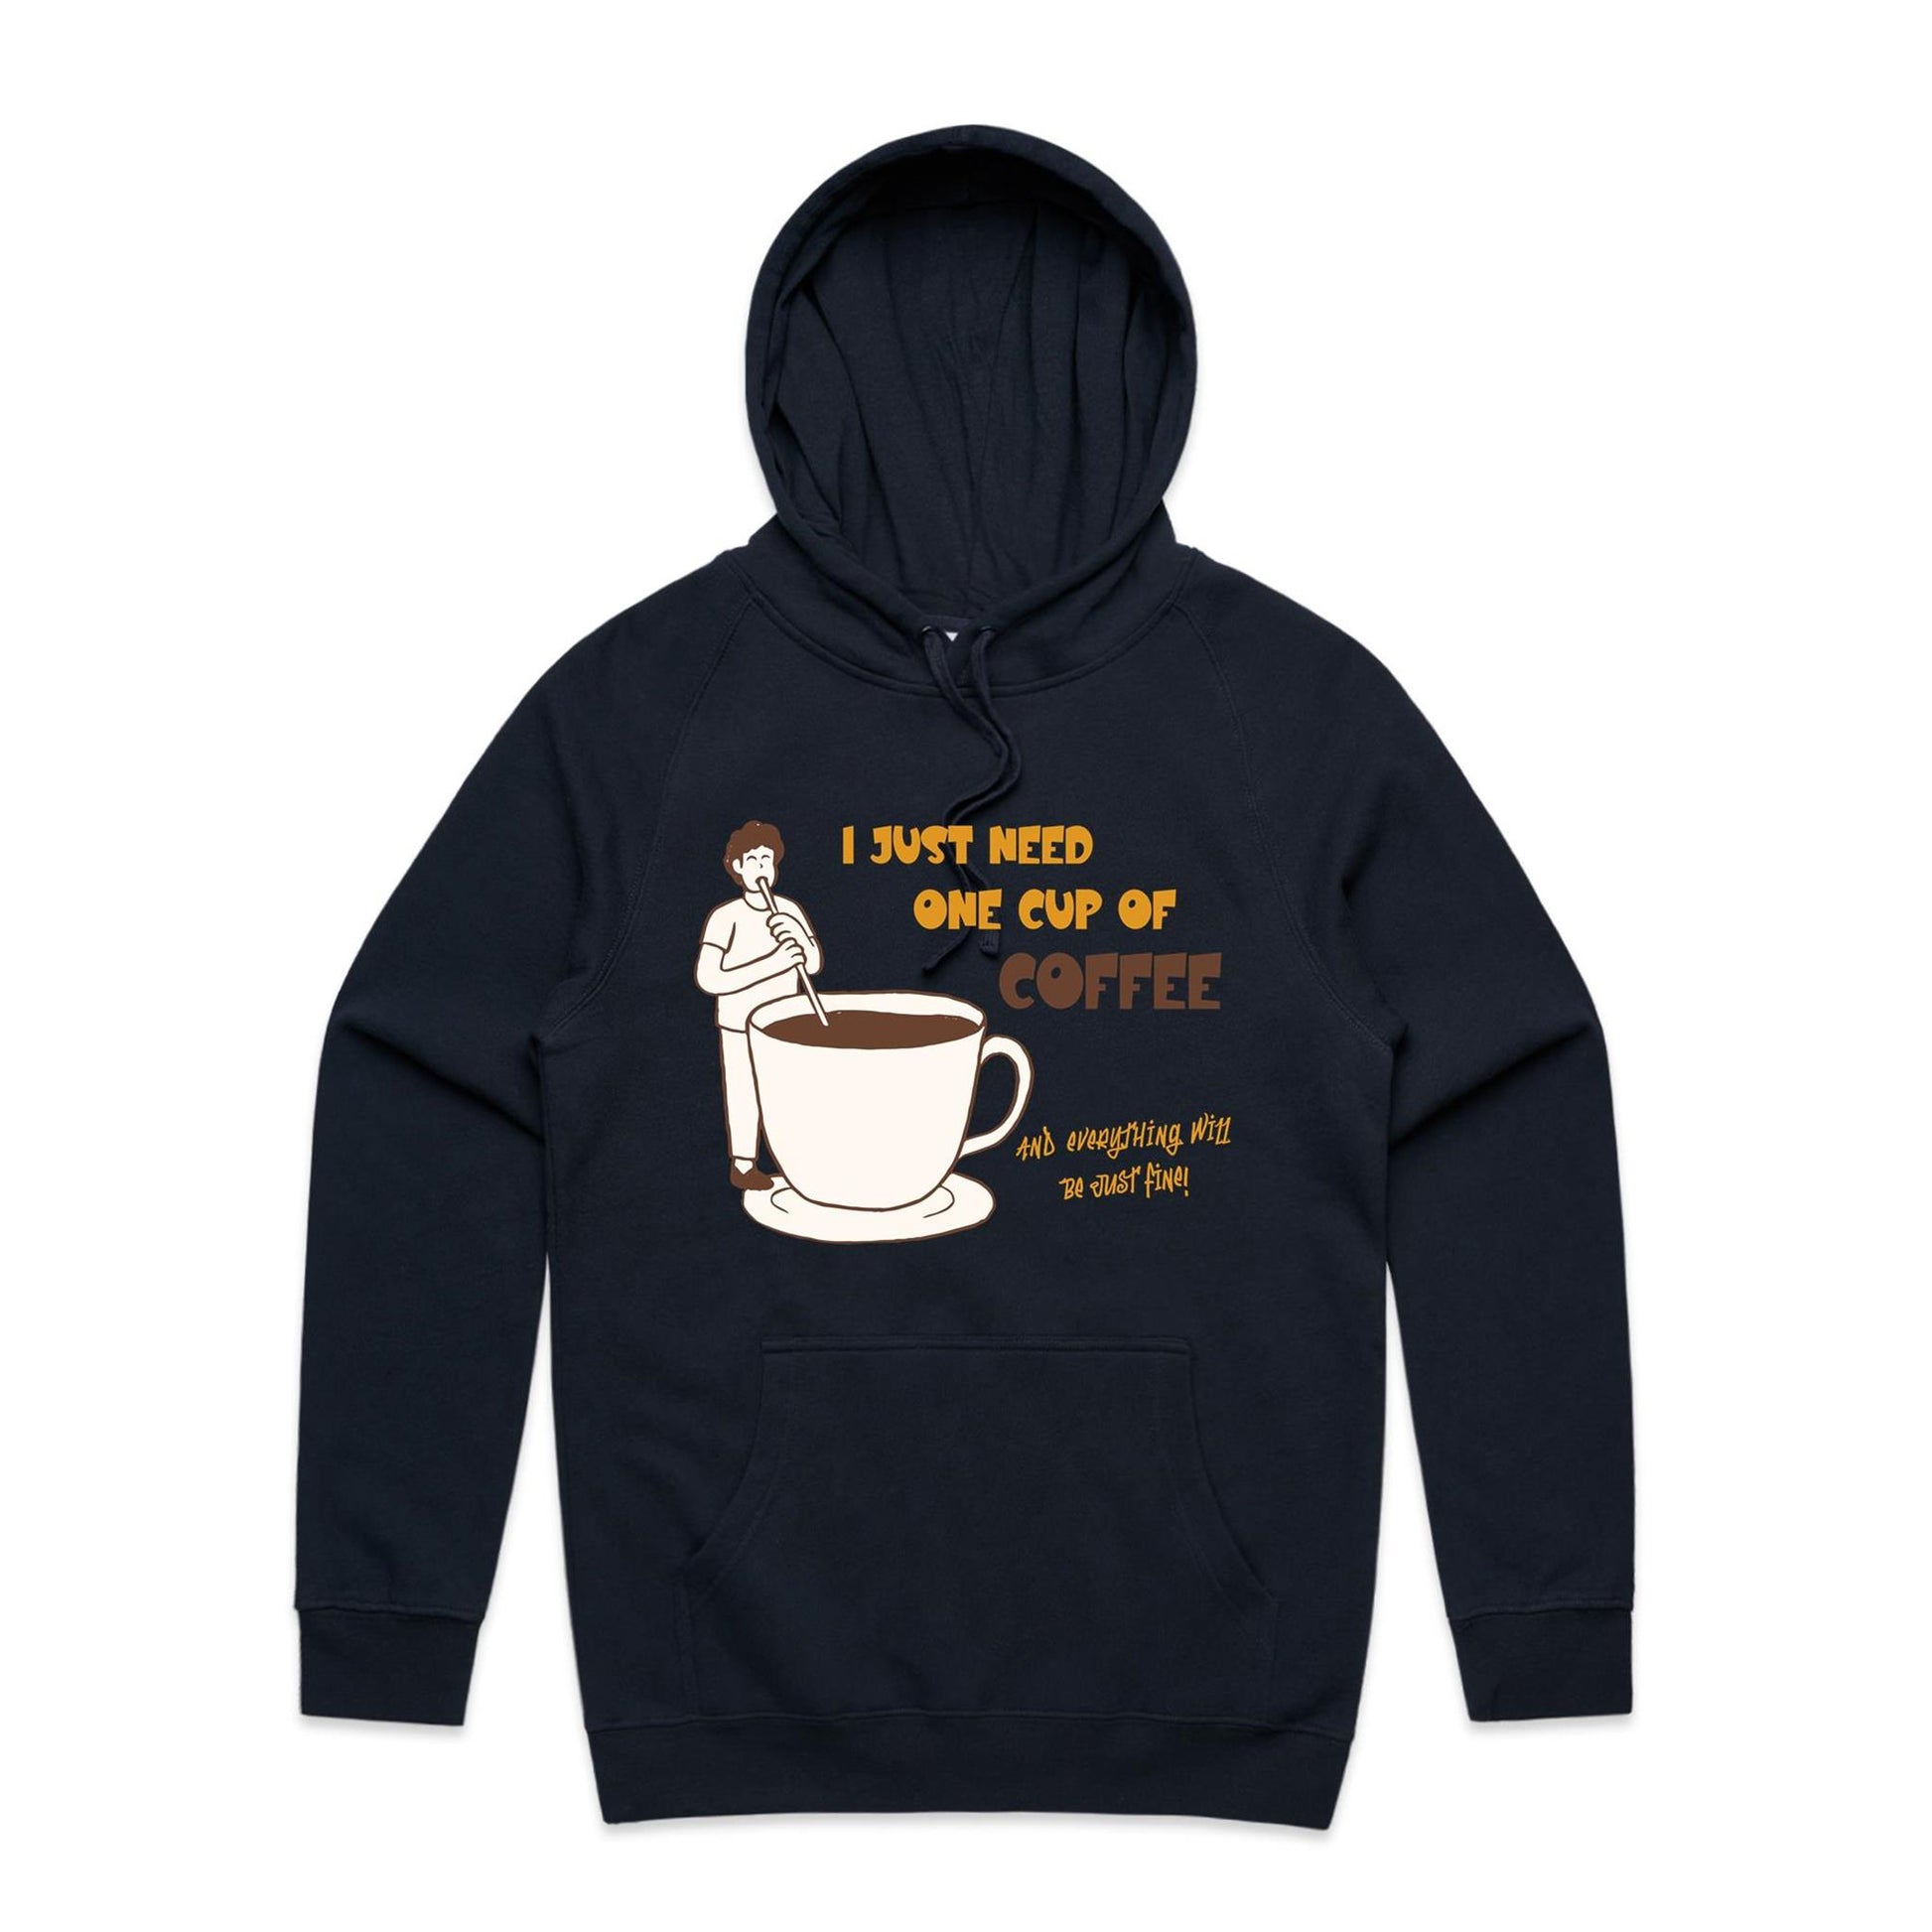 I Just Need One Cup Of Coffee And Everything Will Be Just Fine - Supply Hood Navy Mens Supply Hoodie Coffee